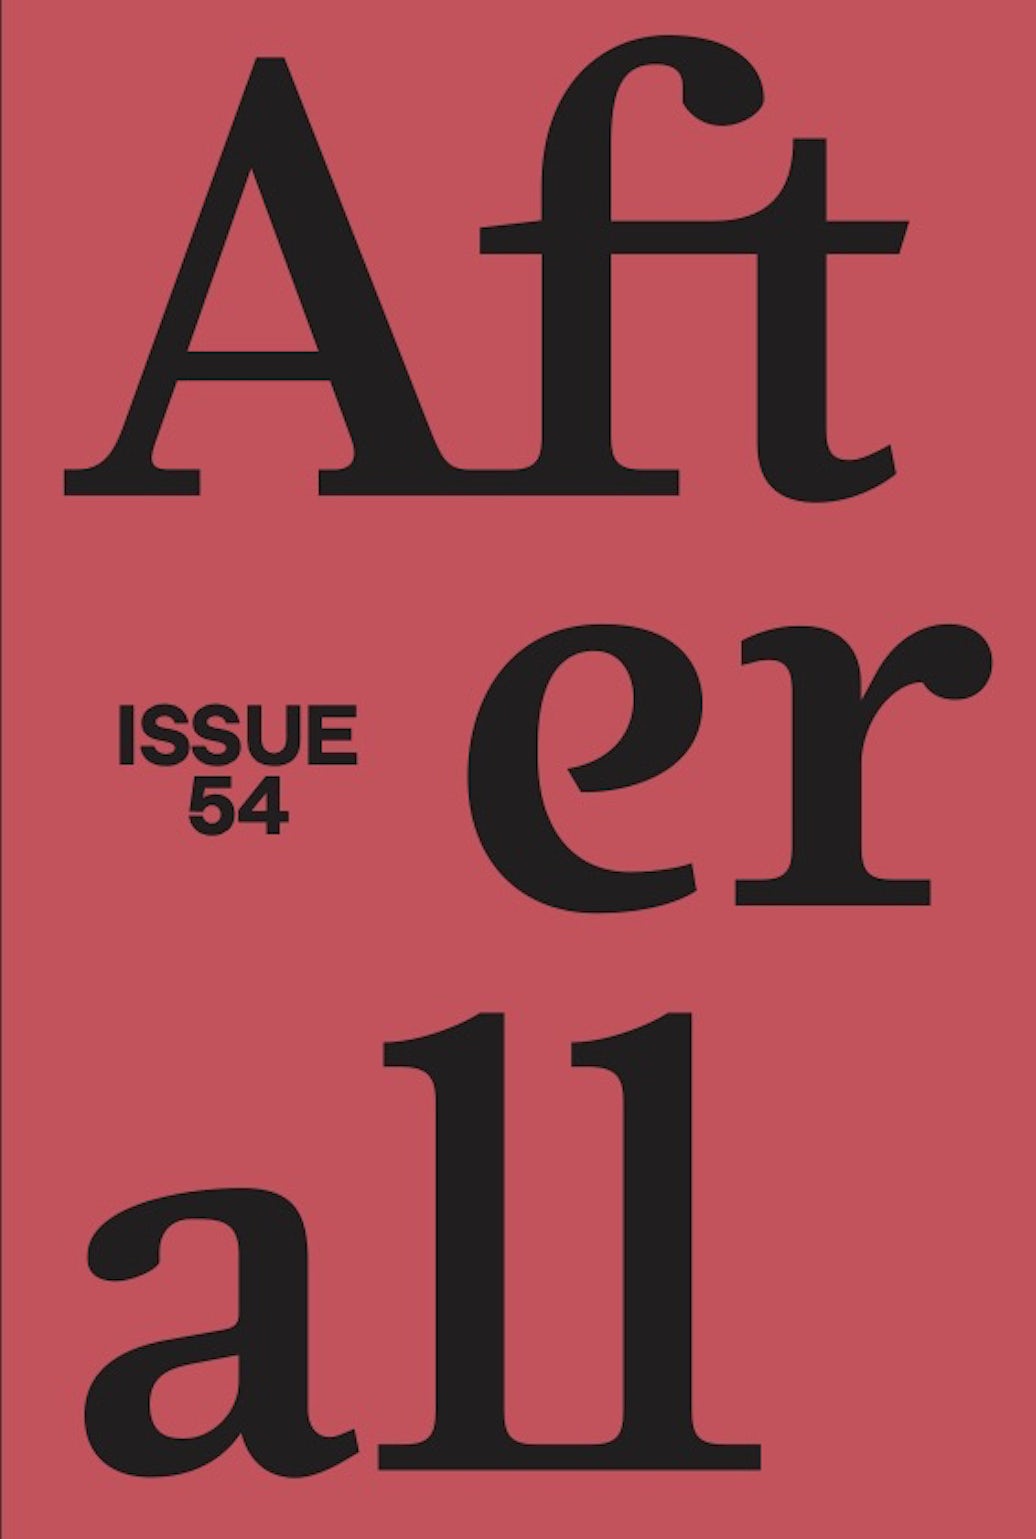 Afterall Issue 54 - AFTERALL-JOURNAL_ISSUE-54_063023_SINGLE-dragged